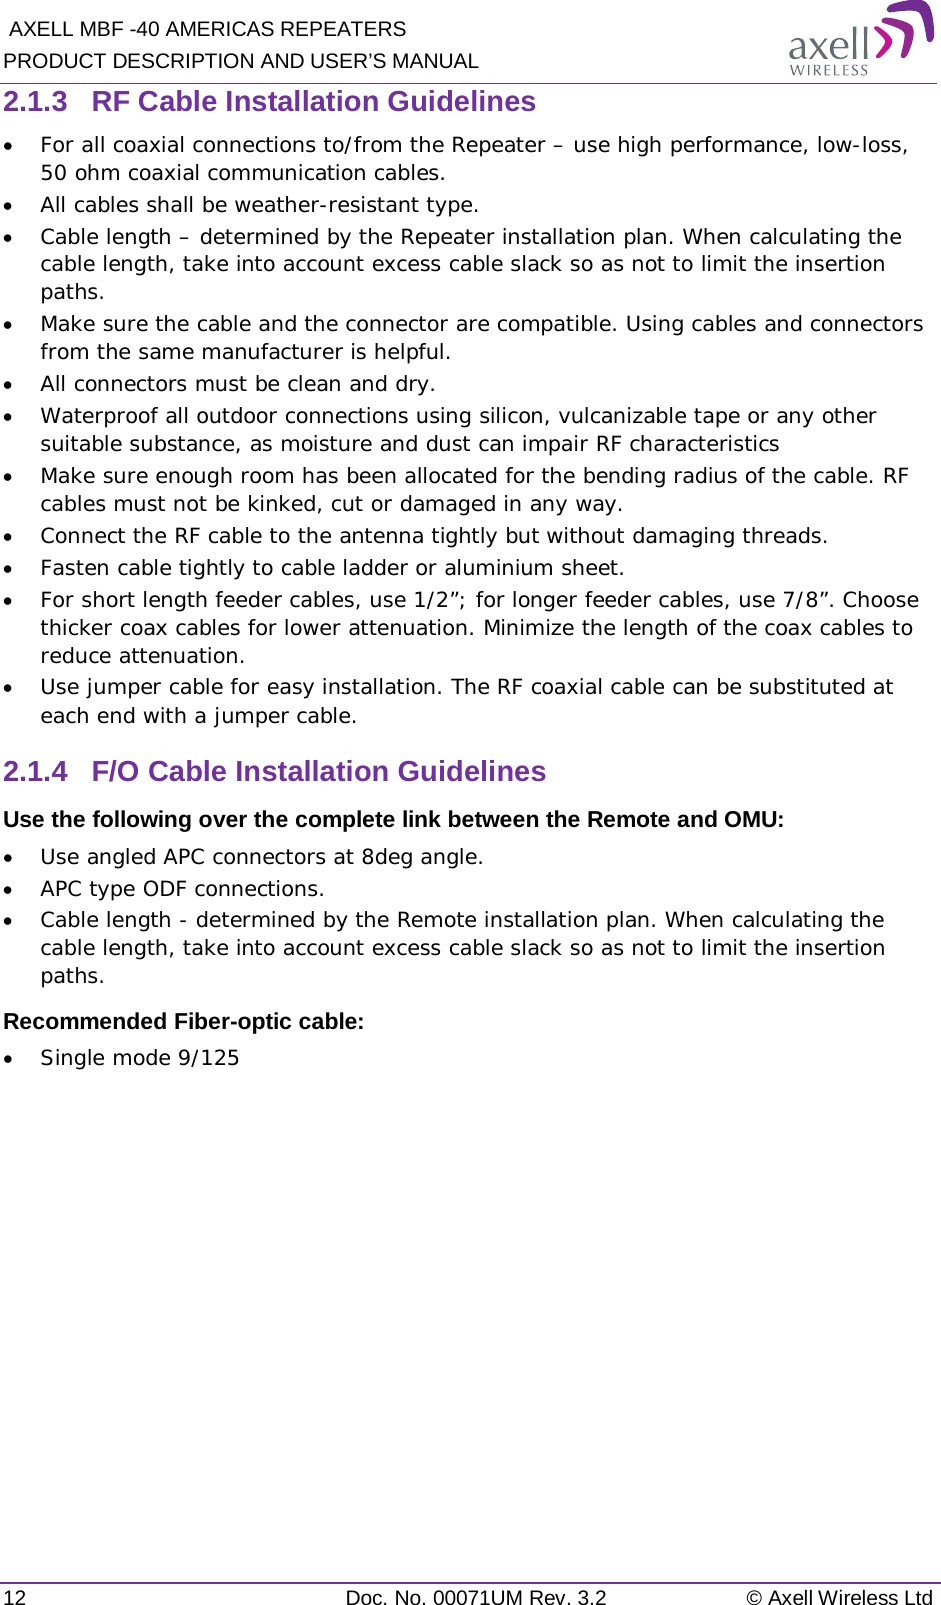  AXELL MBF -40 AMERICAS REPEATERS PRODUCT DESCRIPTION AND USER’S MANUAL 12 Doc. No. 00071UM Rev. 3.2 © Axell Wireless Ltd 2.1.3  RF Cable Installation Guidelines • For all coaxial connections to/from the Repeater – use high performance, low-loss, 50 ohm coaxial communication cables. • All cables shall be weather-resistant type. • Cable length – determined by the Repeater installation plan. When calculating the cable length, take into account excess cable slack so as not to limit the insertion paths. • Make sure the cable and the connector are compatible. Using cables and connectors from the same manufacturer is helpful. • All connectors must be clean and dry. • Waterproof all outdoor connections using silicon, vulcanizable tape or any other suitable substance, as moisture and dust can impair RF characteristics • Make sure enough room has been allocated for the bending radius of the cable. RF cables must not be kinked, cut or damaged in any way. • Connect the RF cable to the antenna tightly but without damaging threads. • Fasten cable tightly to cable ladder or aluminium sheet. • For short length feeder cables, use 1/2”; for longer feeder cables, use 7/8”. Choose thicker coax cables for lower attenuation. Minimize the length of the coax cables to reduce attenuation. • Use jumper cable for easy installation. The RF coaxial cable can be substituted at each end with a jumper cable. 2.1.4  F/O Cable Installation Guidelines Use the following over the complete link between the Remote and OMU: • Use angled APC connectors at 8deg angle. • APC type ODF connections. • Cable length - determined by the Remote installation plan. When calculating the cable length, take into account excess cable slack so as not to limit the insertion paths. Recommended Fiber-optic cable:  • Single mode 9/125   